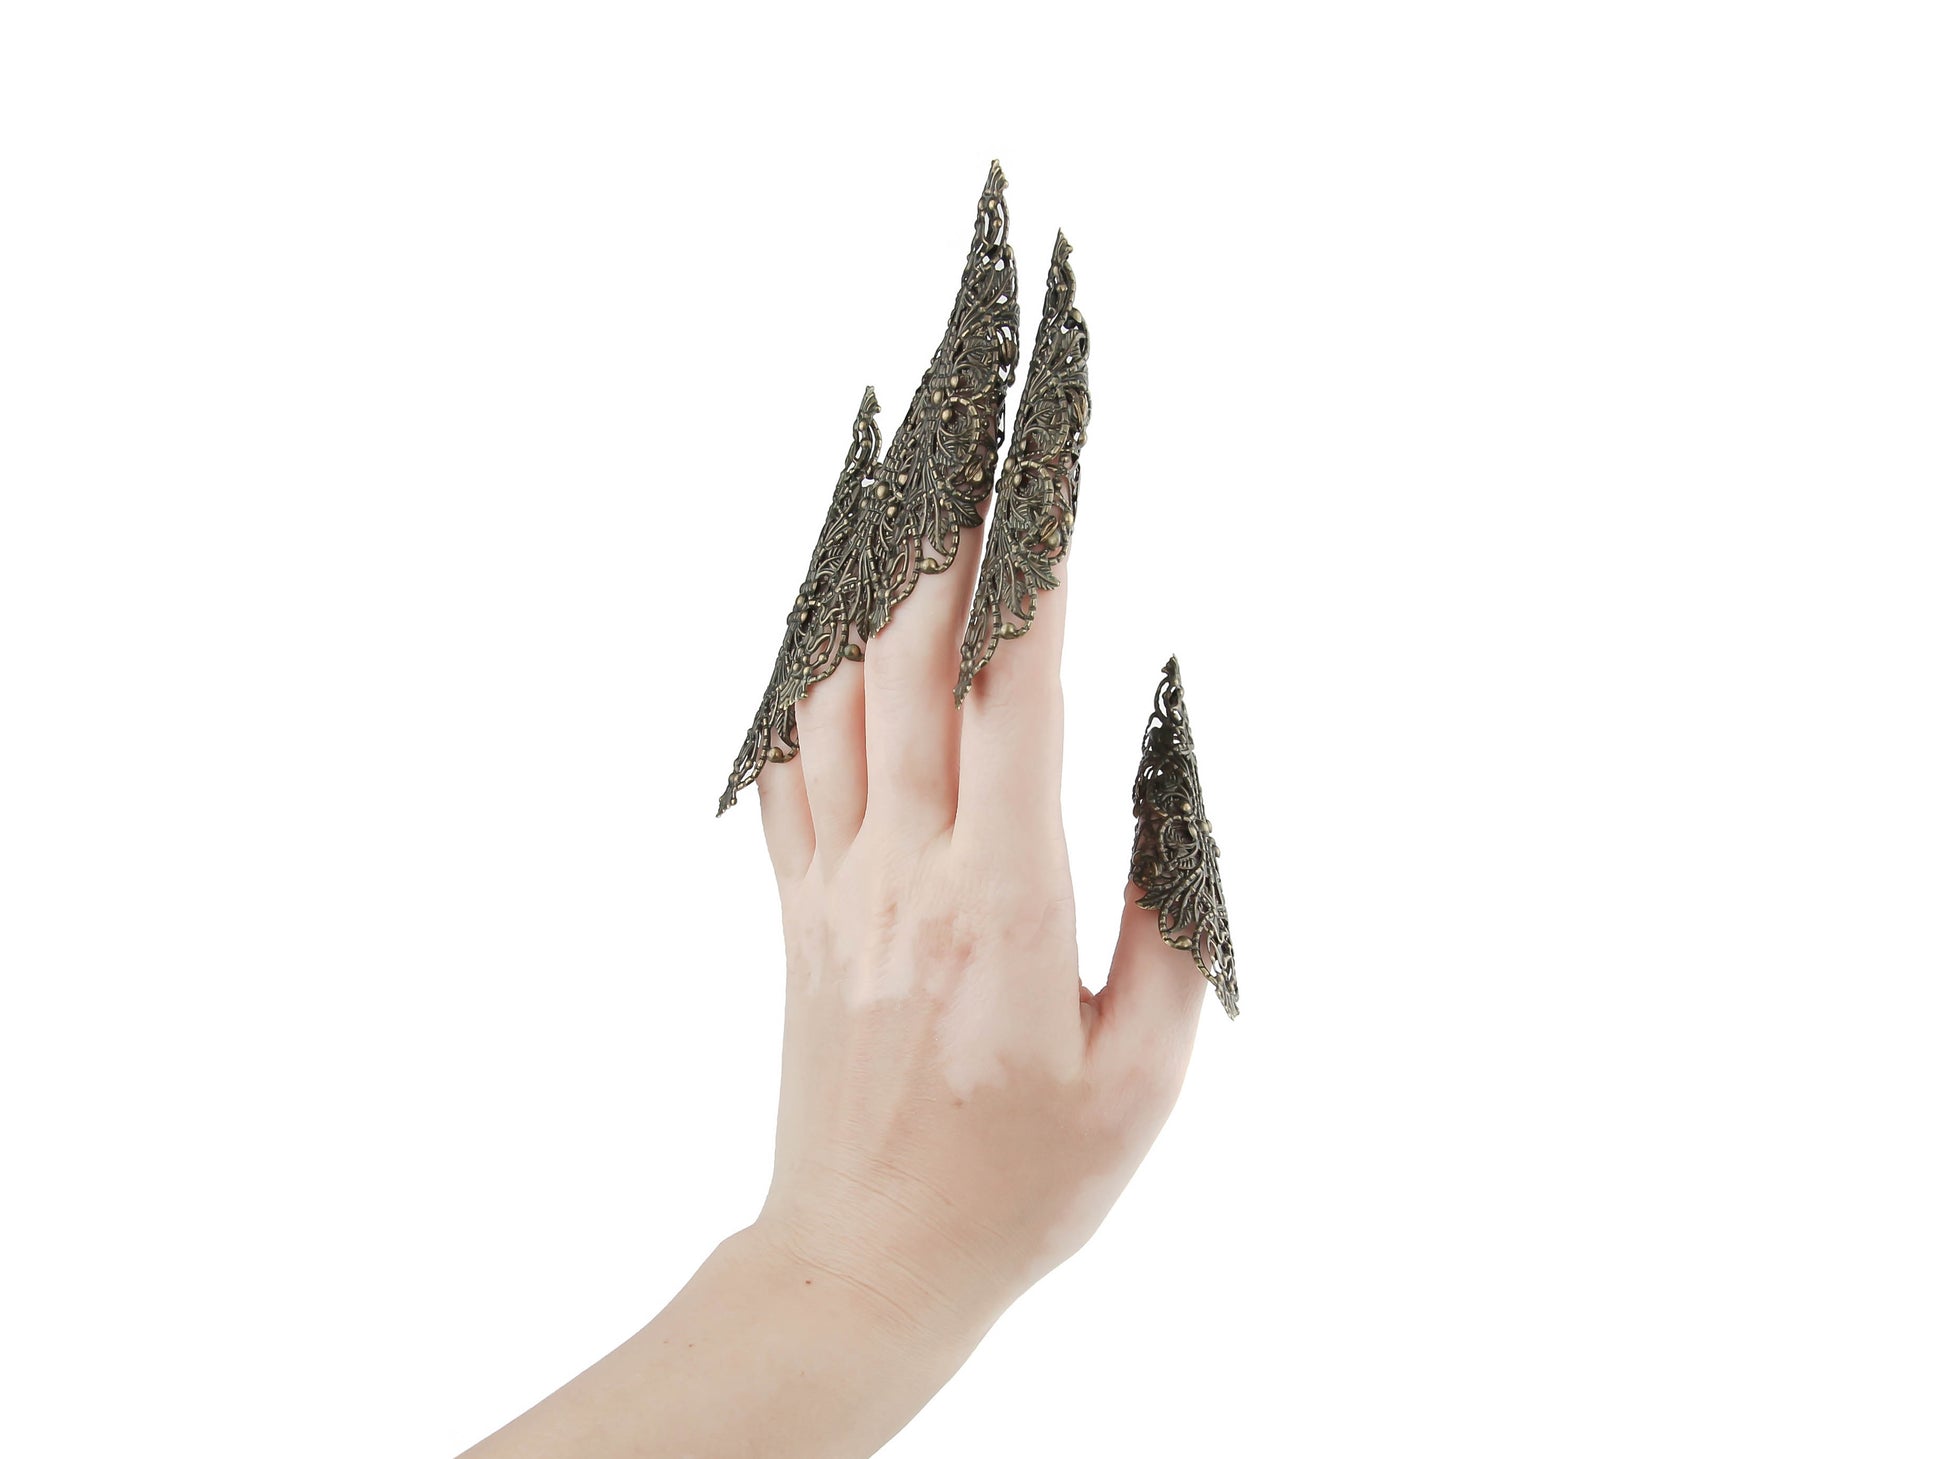 A striking full hand set of extra-long nail claw rings by Myril Jewels, crafted for the neo-goth jewelry lover. These claws embody a dark avant-garde aesthetic, perfect for Halloween, gothic-chic events, or as a bold accessory for everyday wear by those who embrace a witchcore or whimsigoth style.